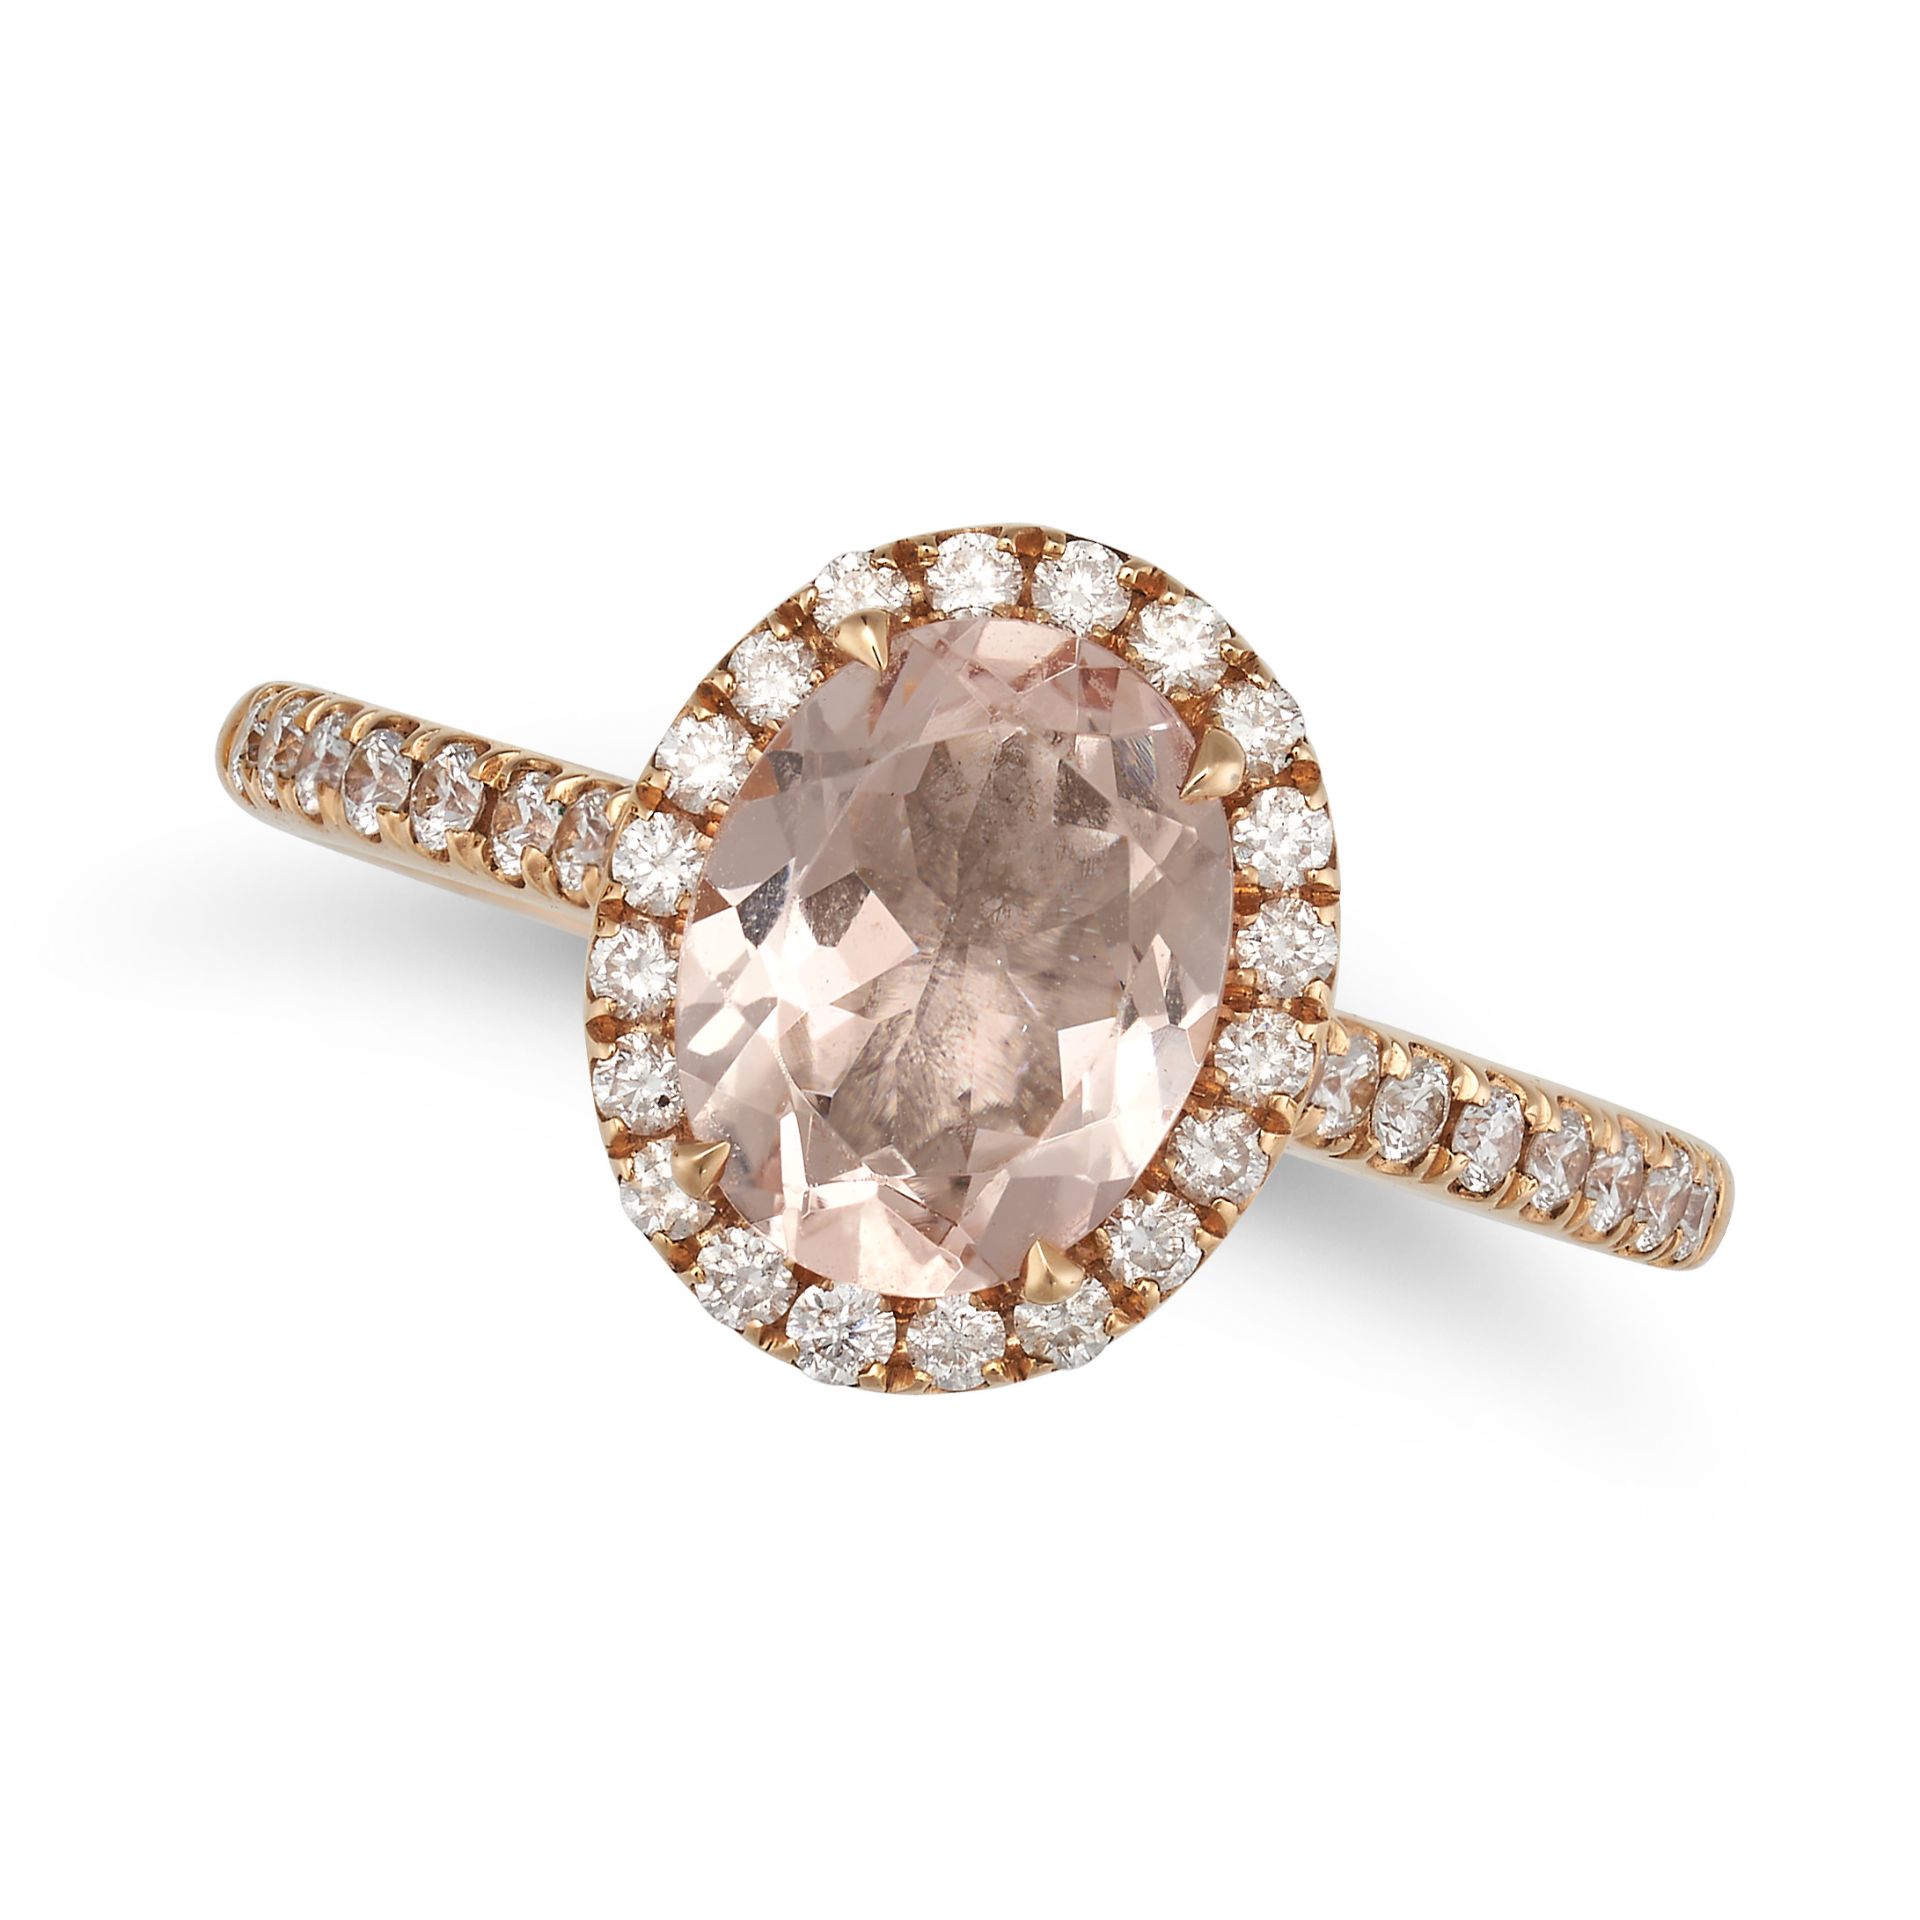 NO RESERVE - A MORGANITE AND DIAMOND HALO RING in yellow gold, set with an oval cut morganite of ...